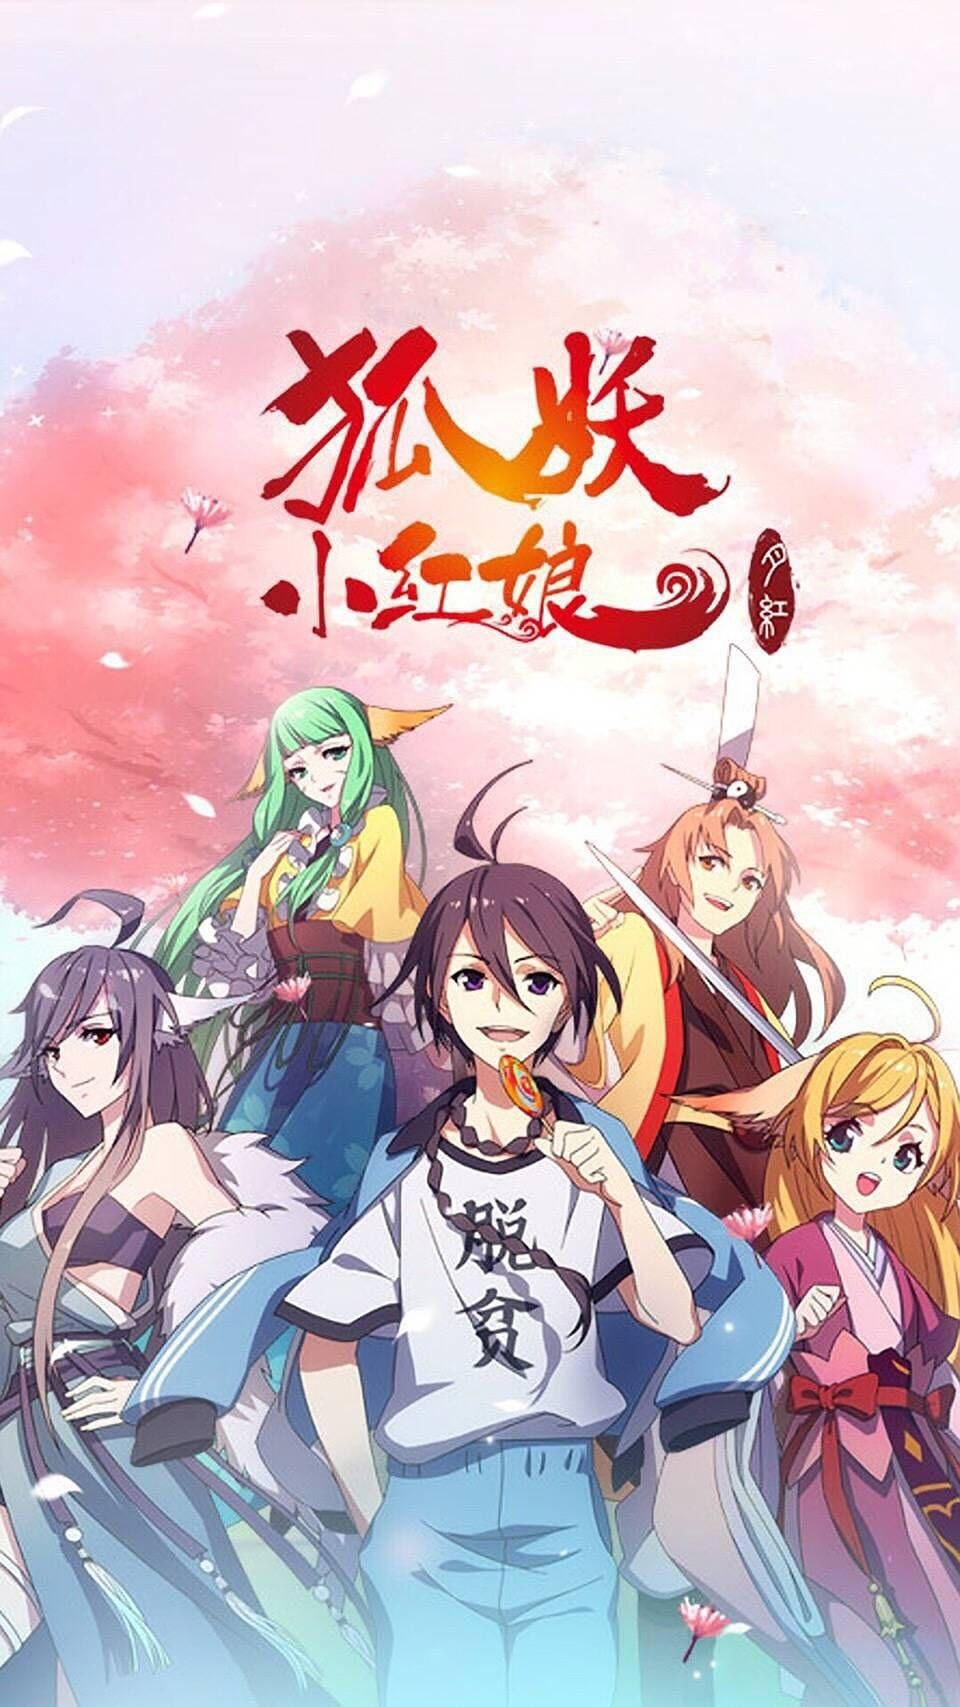 10 Anime Based On Chinese Culture